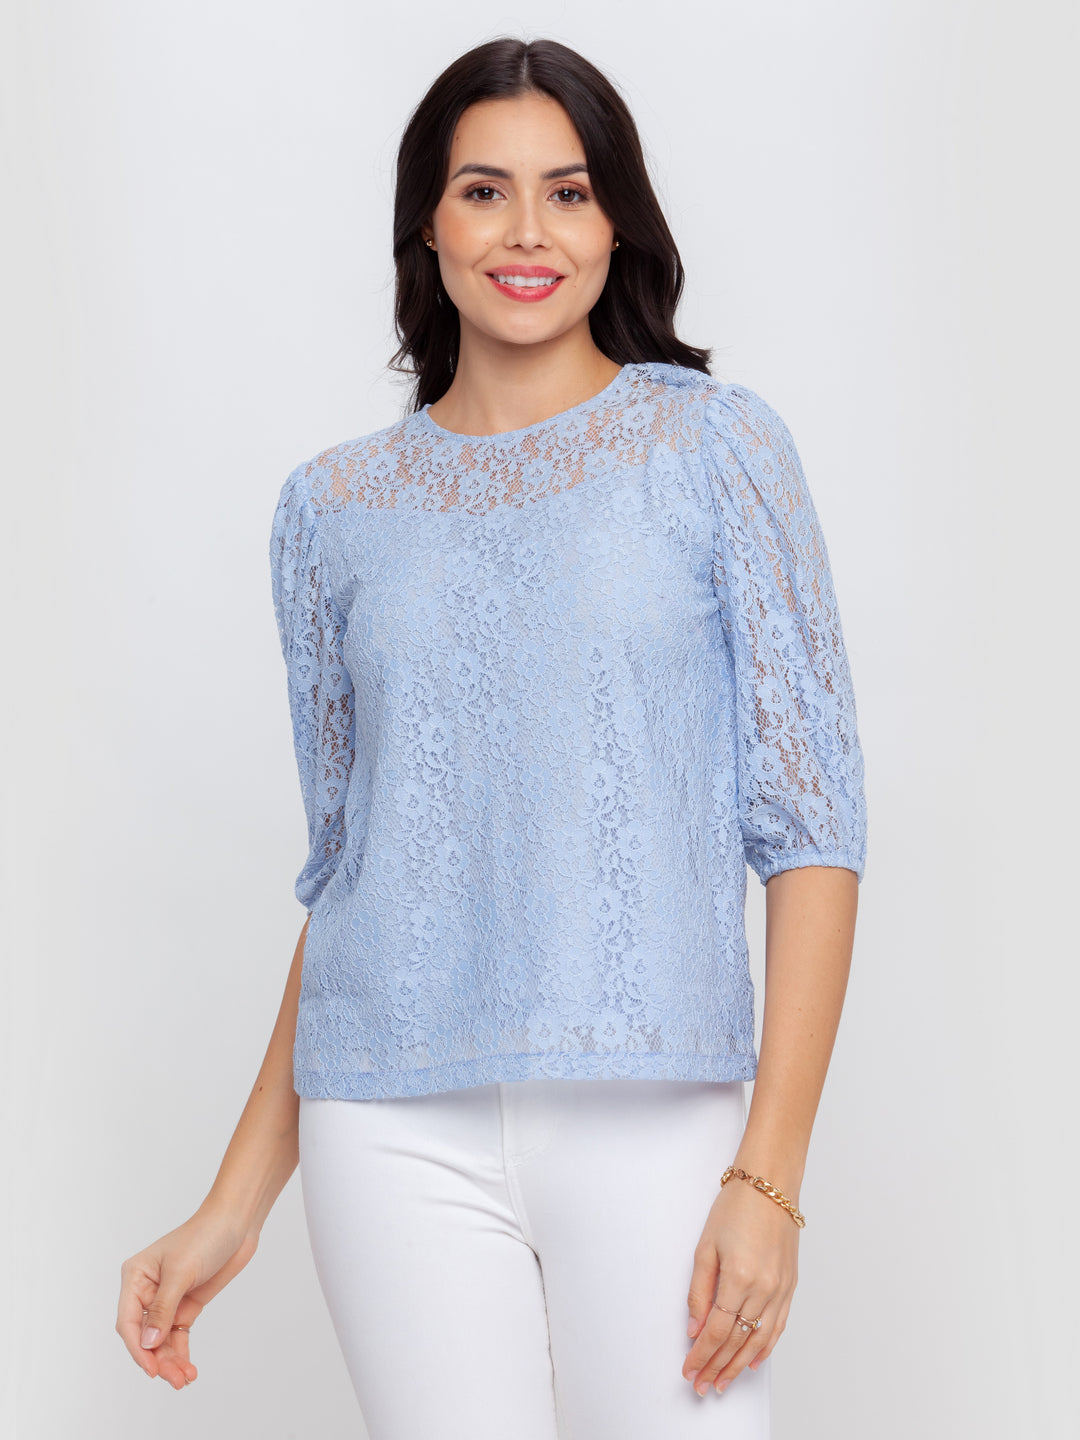 Blue Lace Puff Sleeve Top For Women